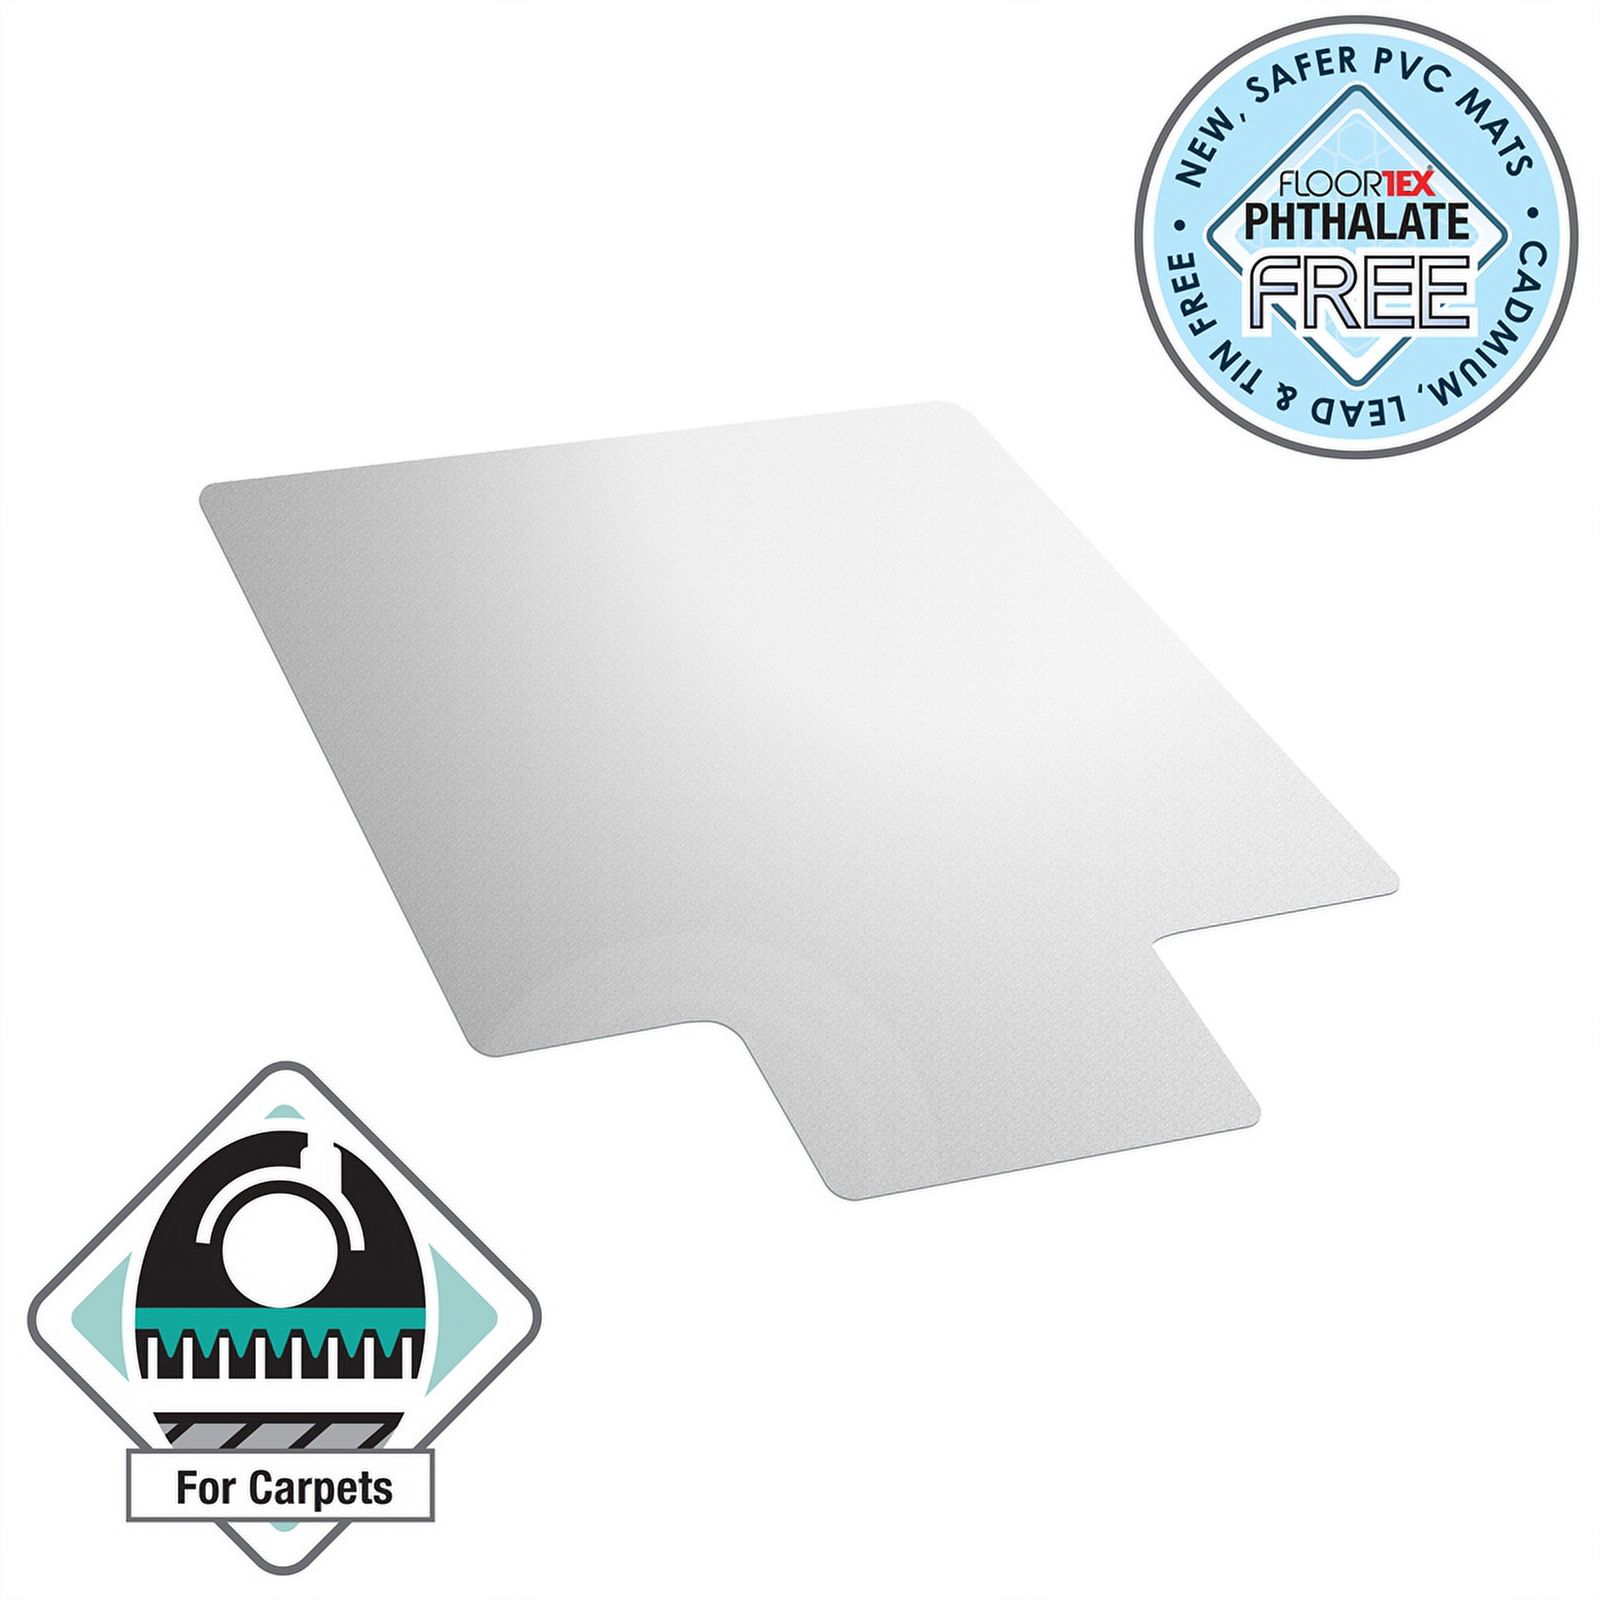 Advantagemat® Vinyl Lipped Chair Mat for Carpets up to 1/4" - 45" x 53" - image 1 of 7